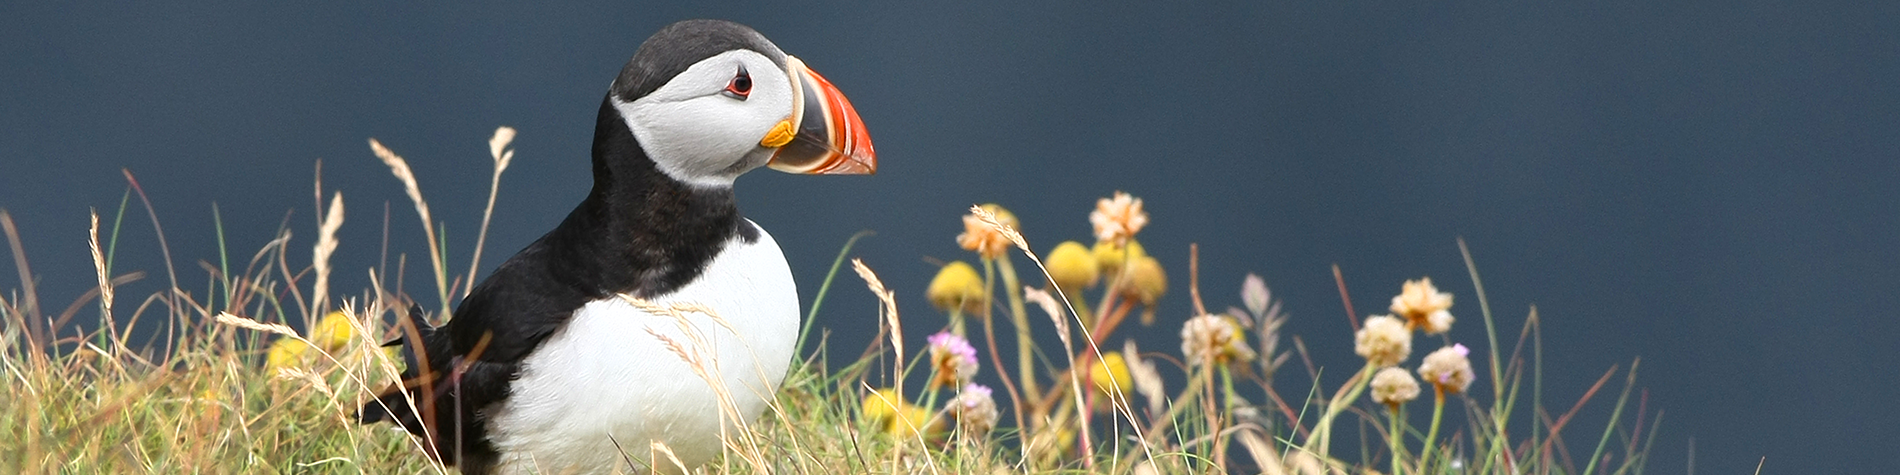 Puffin Sitting in Field with Plants